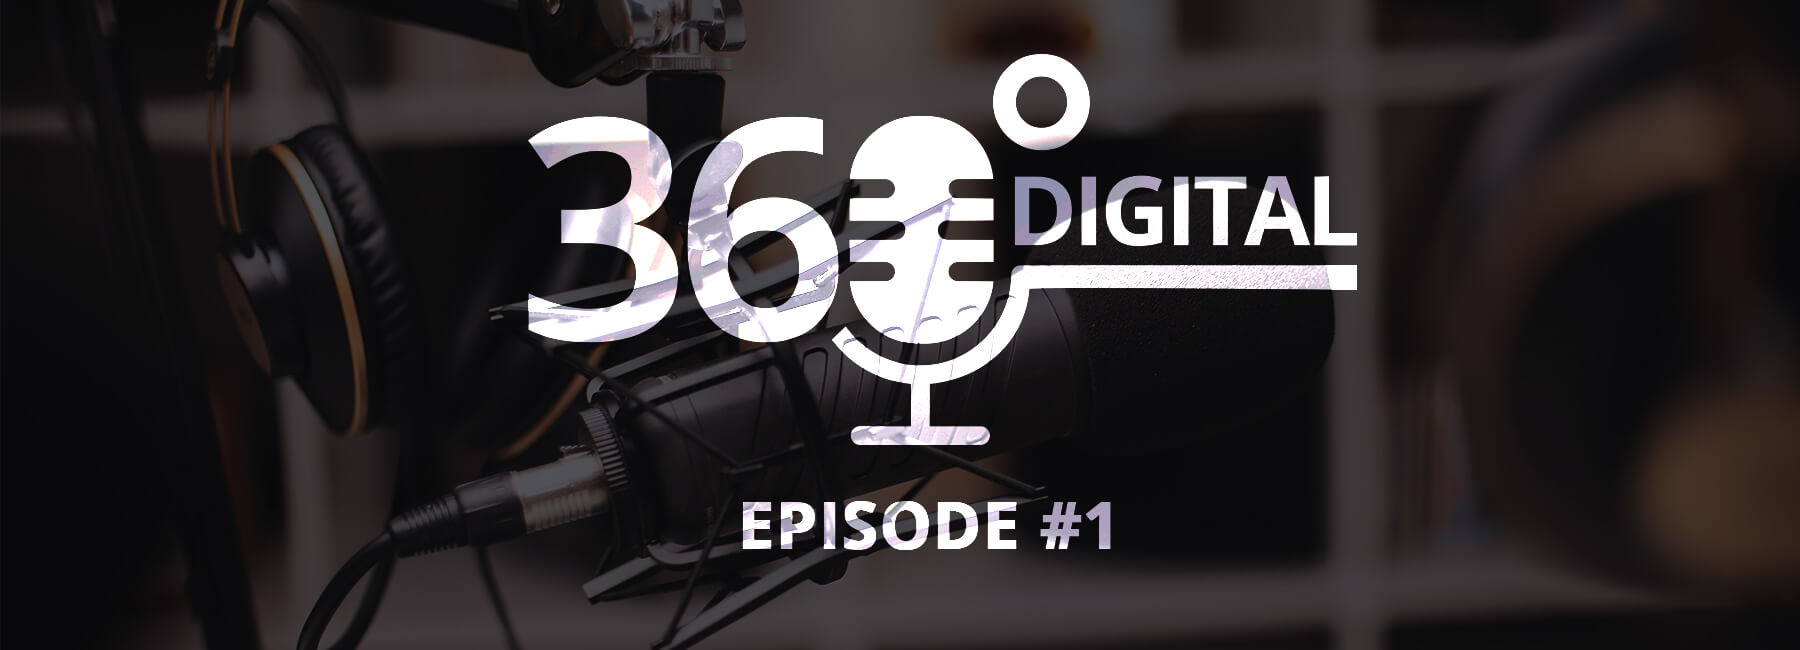 Mopinion launches brand new podcast 360 Digital